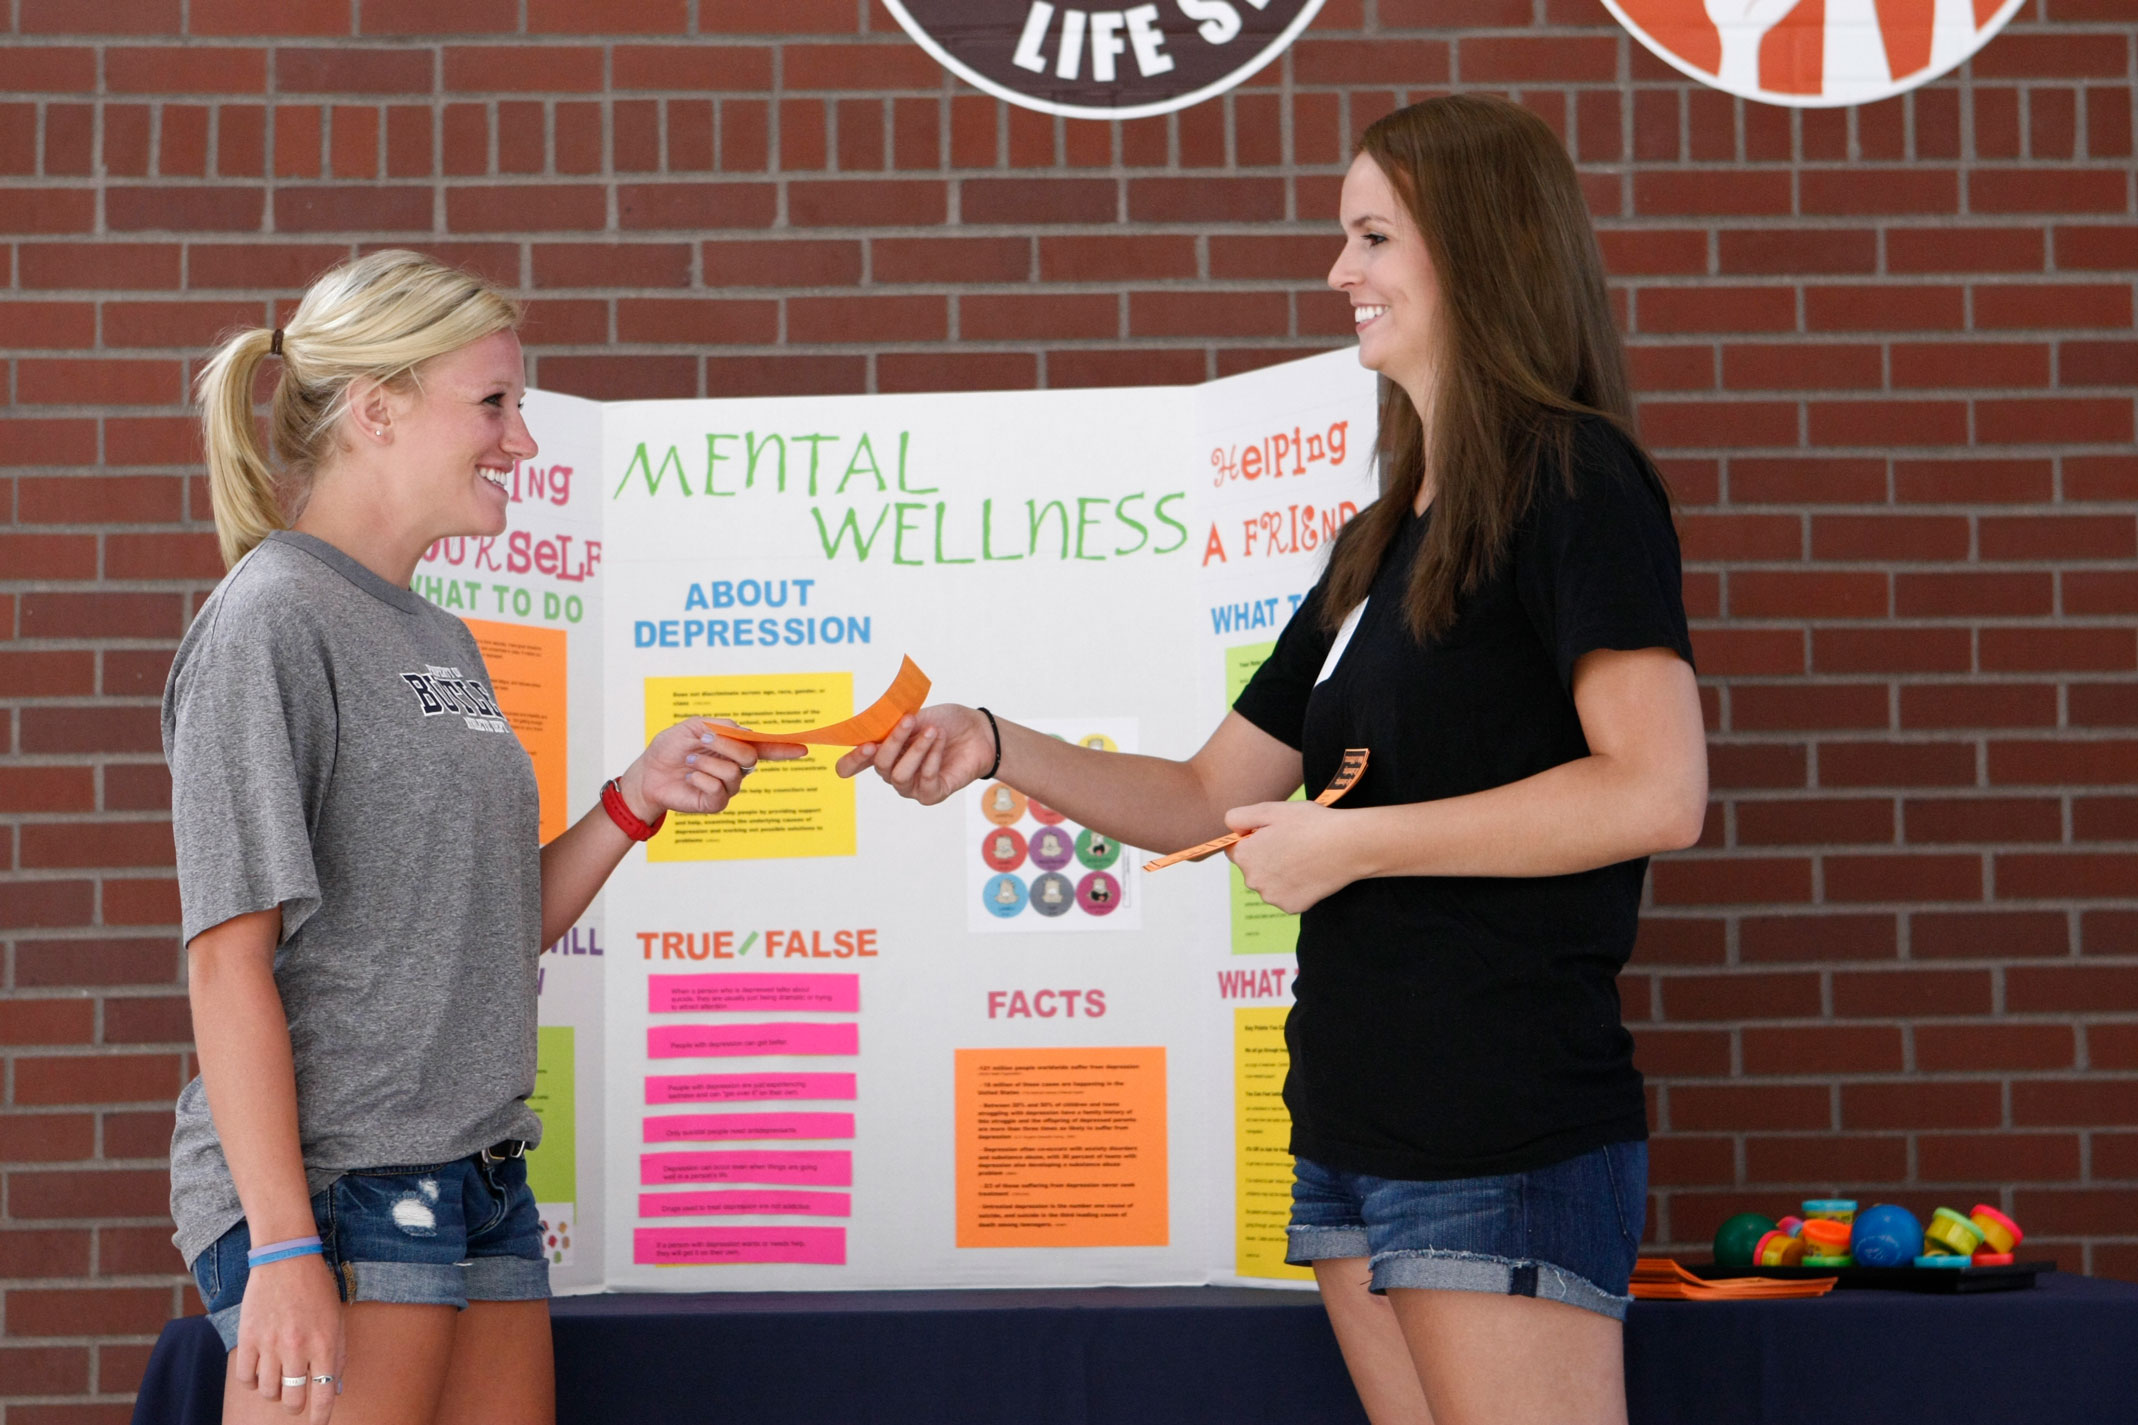 Staff member hands flyer to student at mental wellness event on campus